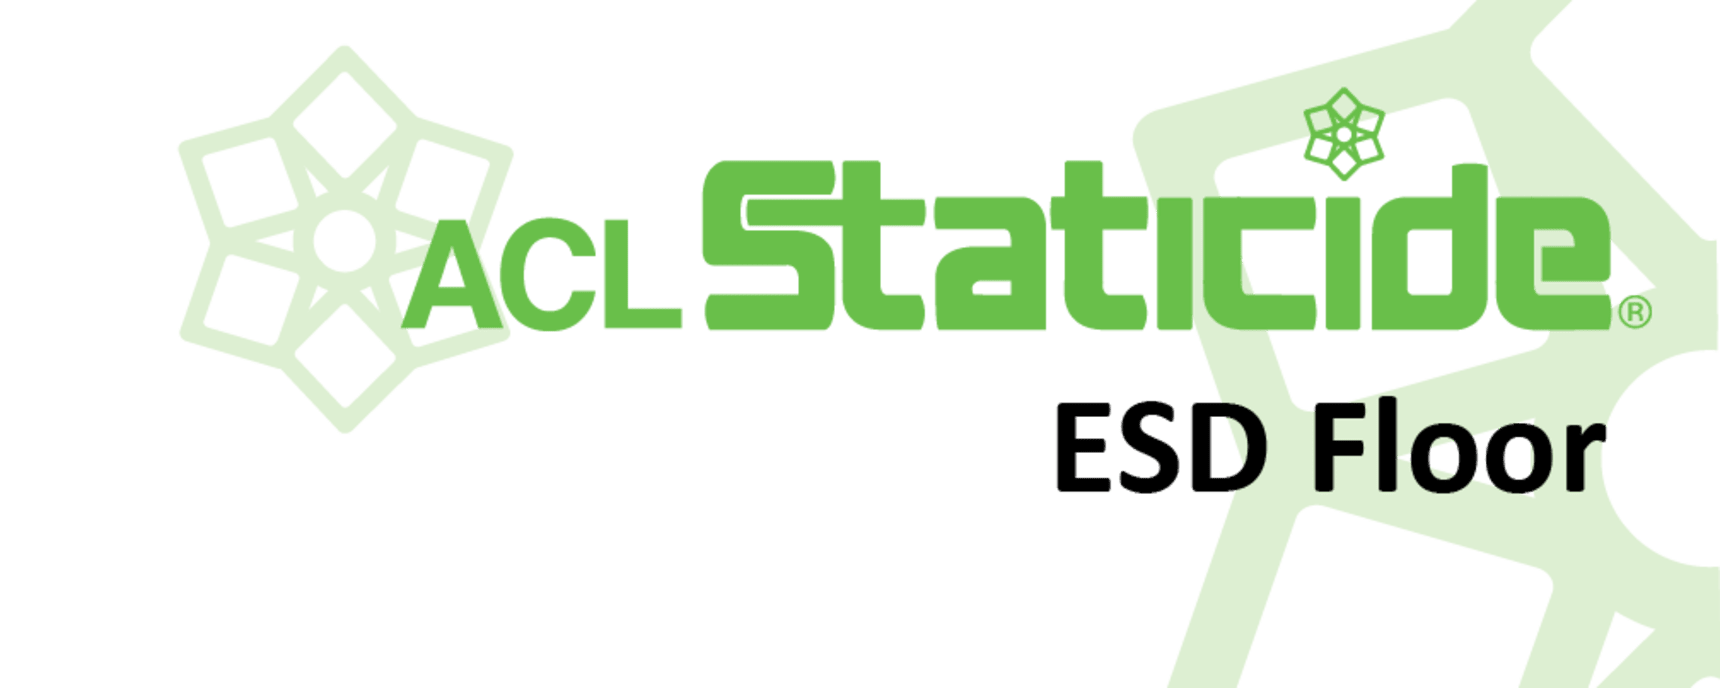 ACL Staticide banner